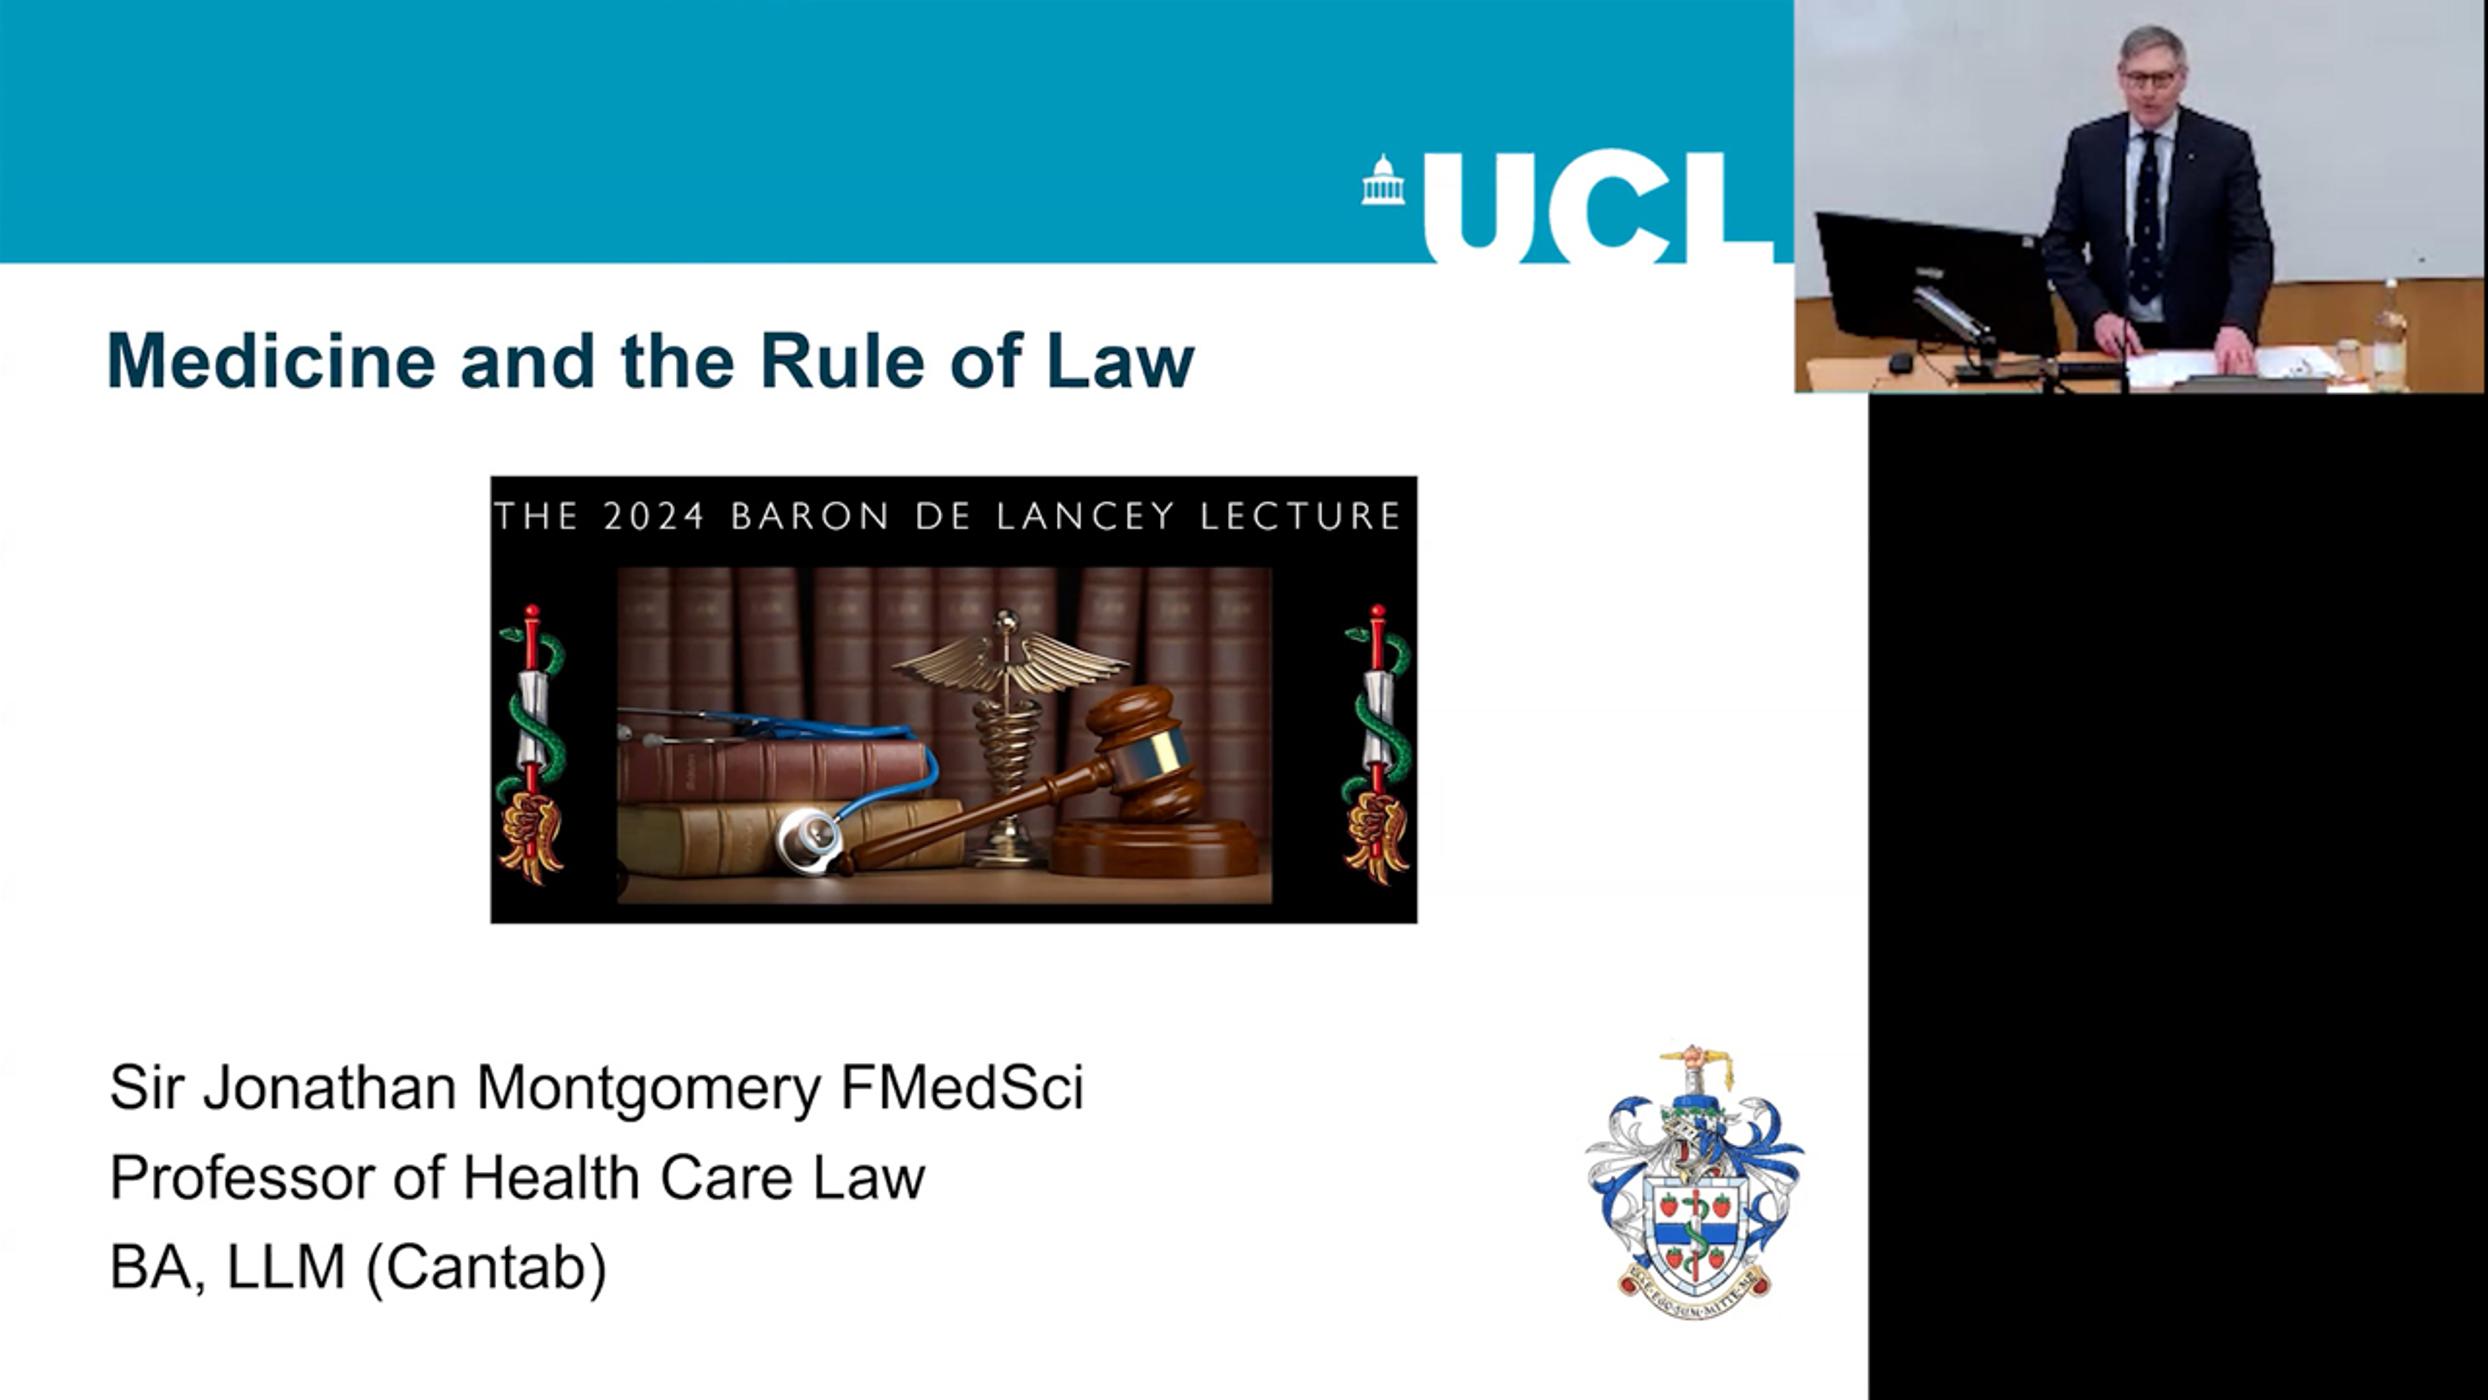 'Medicine and the Rule of Law': The Baron Ver Heyden de Lancey Lecture 2024